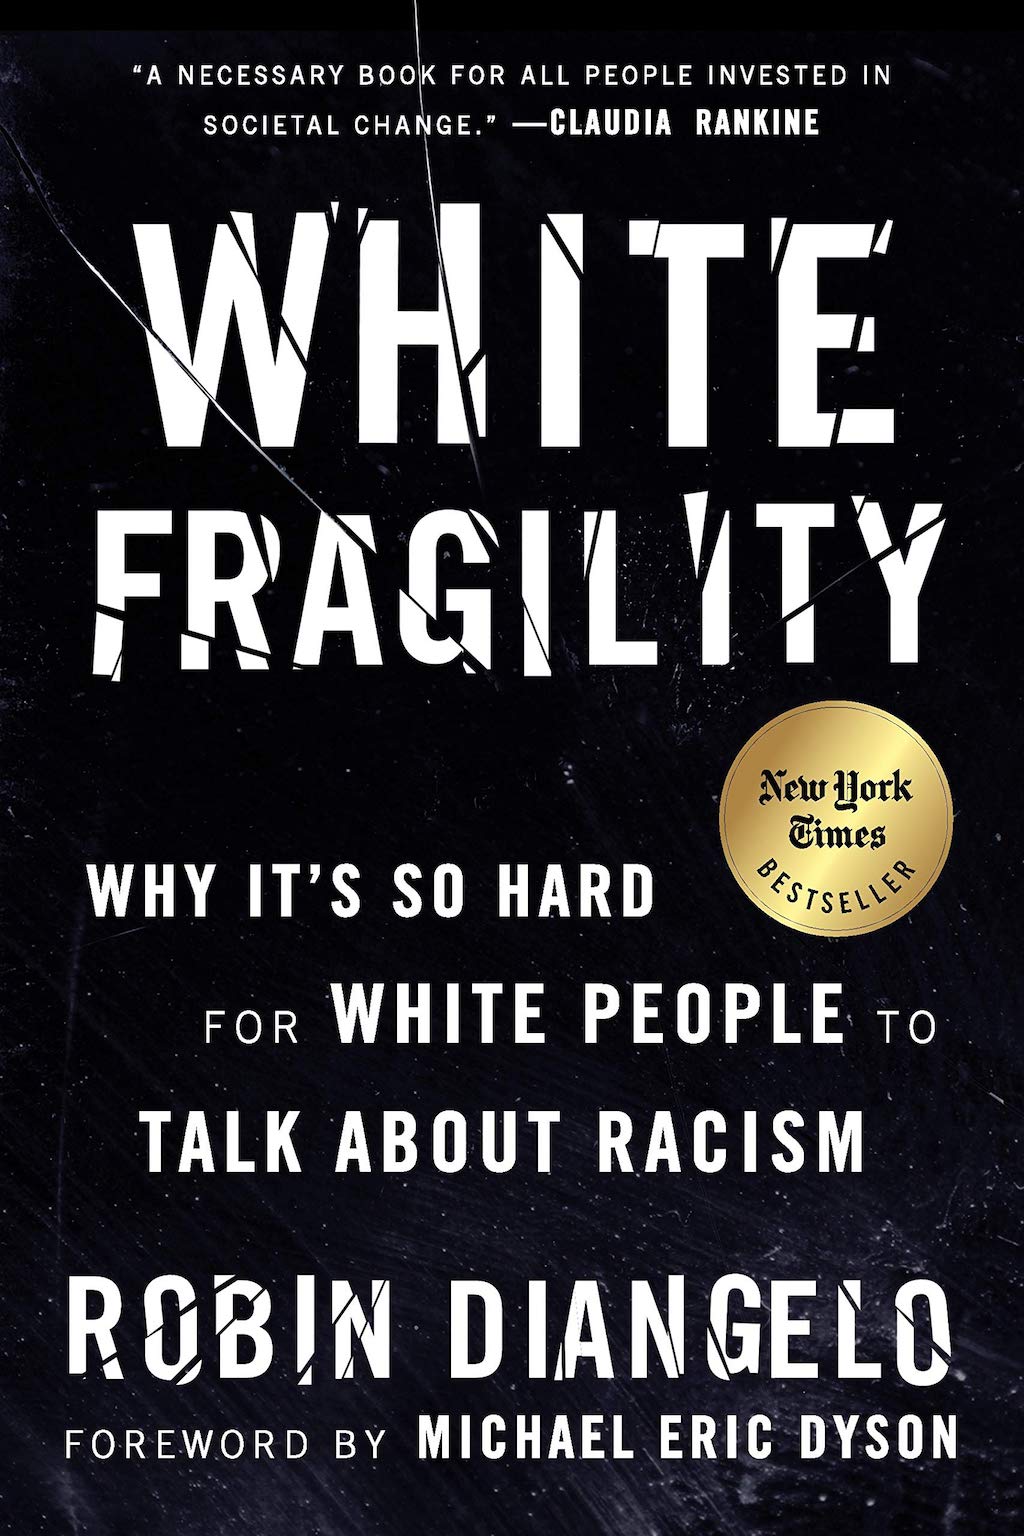 Cover art for the book White Fragility: Why it's So Hard for White People to Talk About Racism by Robin DiAngelo, part of list of inspiration sources for Mark Lomax II's 400: An Afrikan Epic